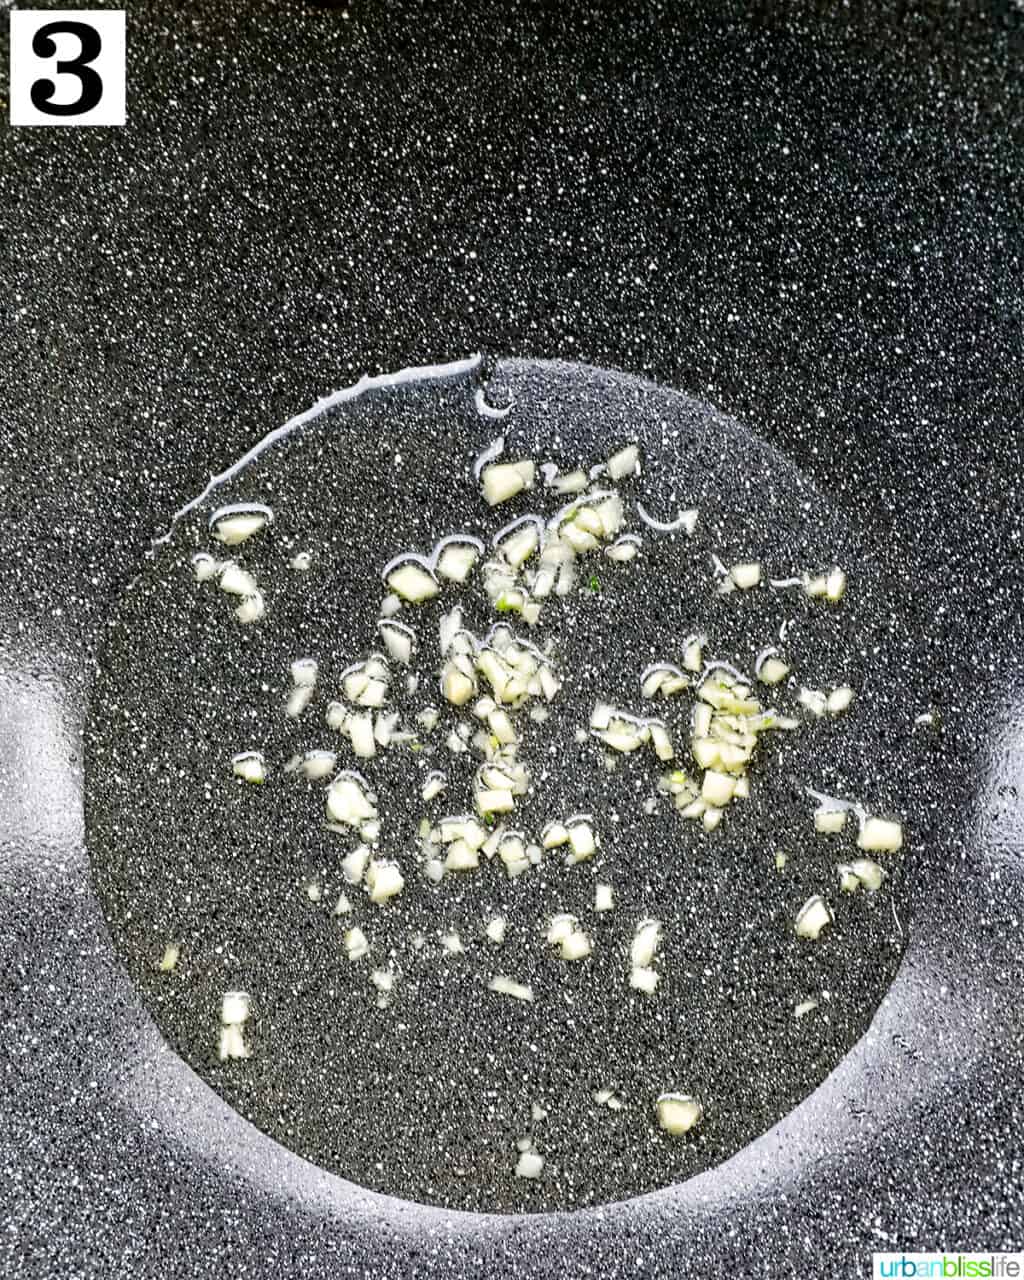 minced garlic cooking in oil in a wok.